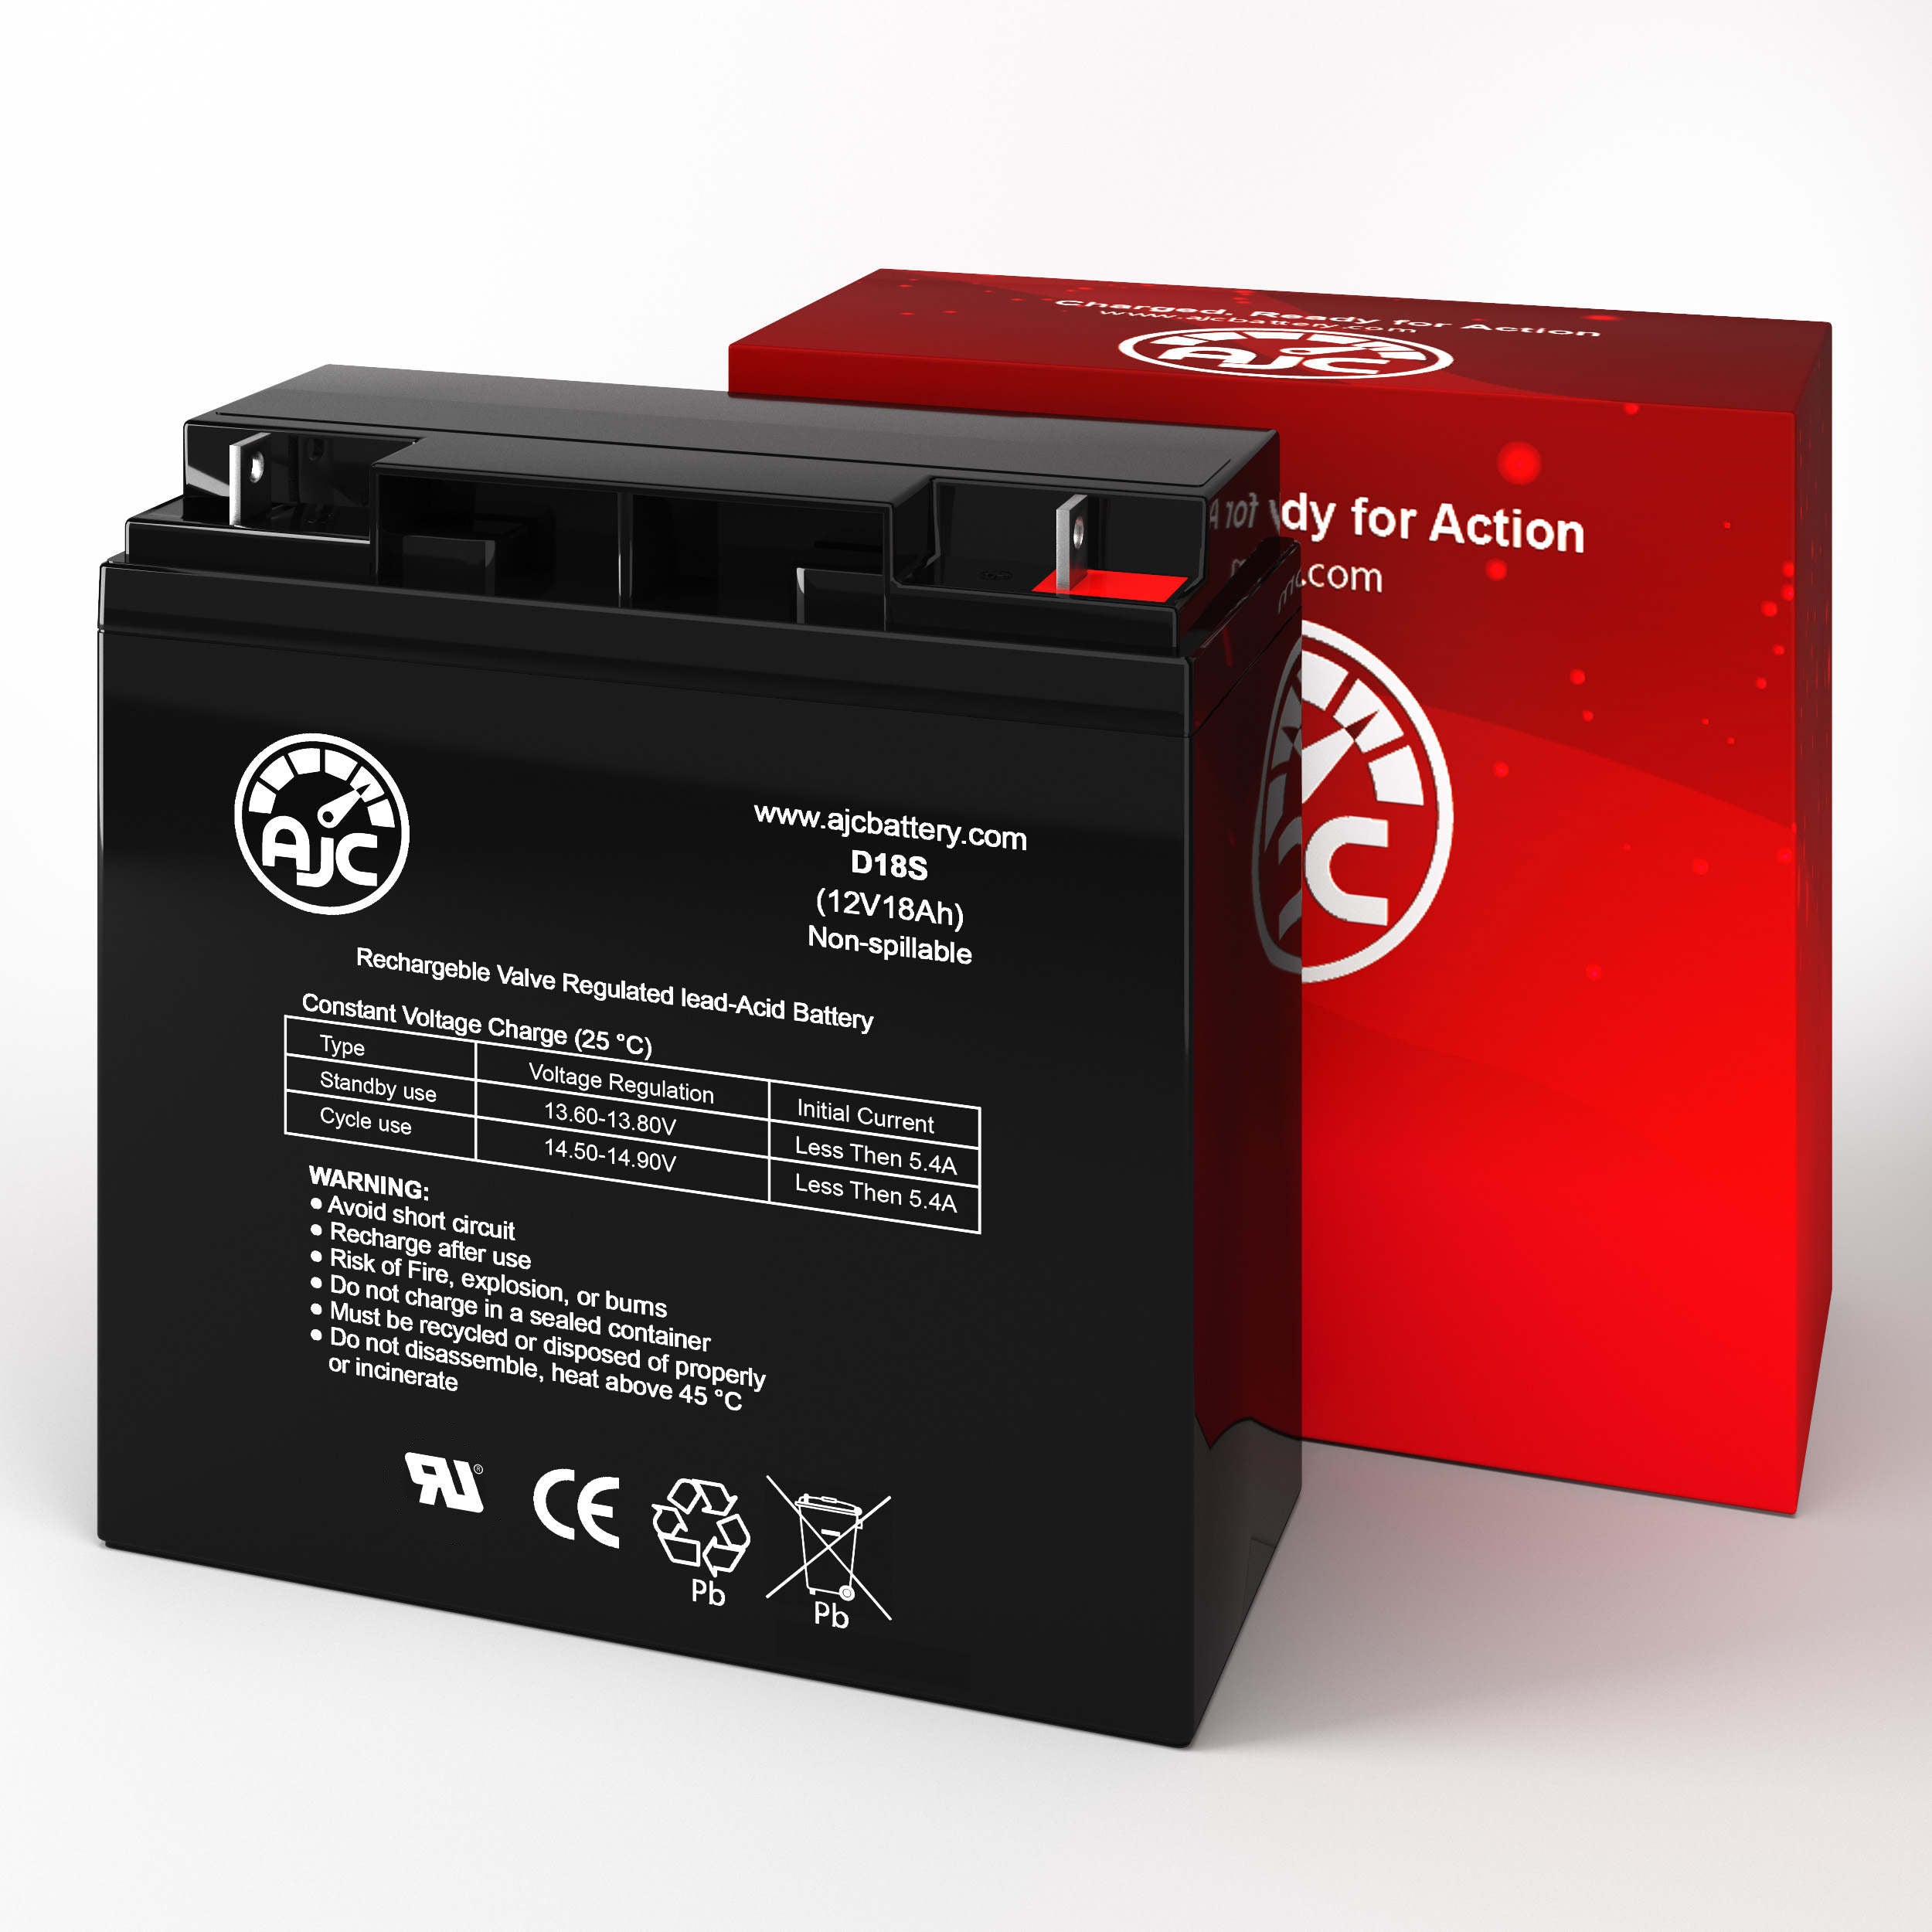 Stanley J5C09 500 Amp 12V 18Ah Jump Starter Battery - This Is an AJC Brand Replacement - image 2 of 6